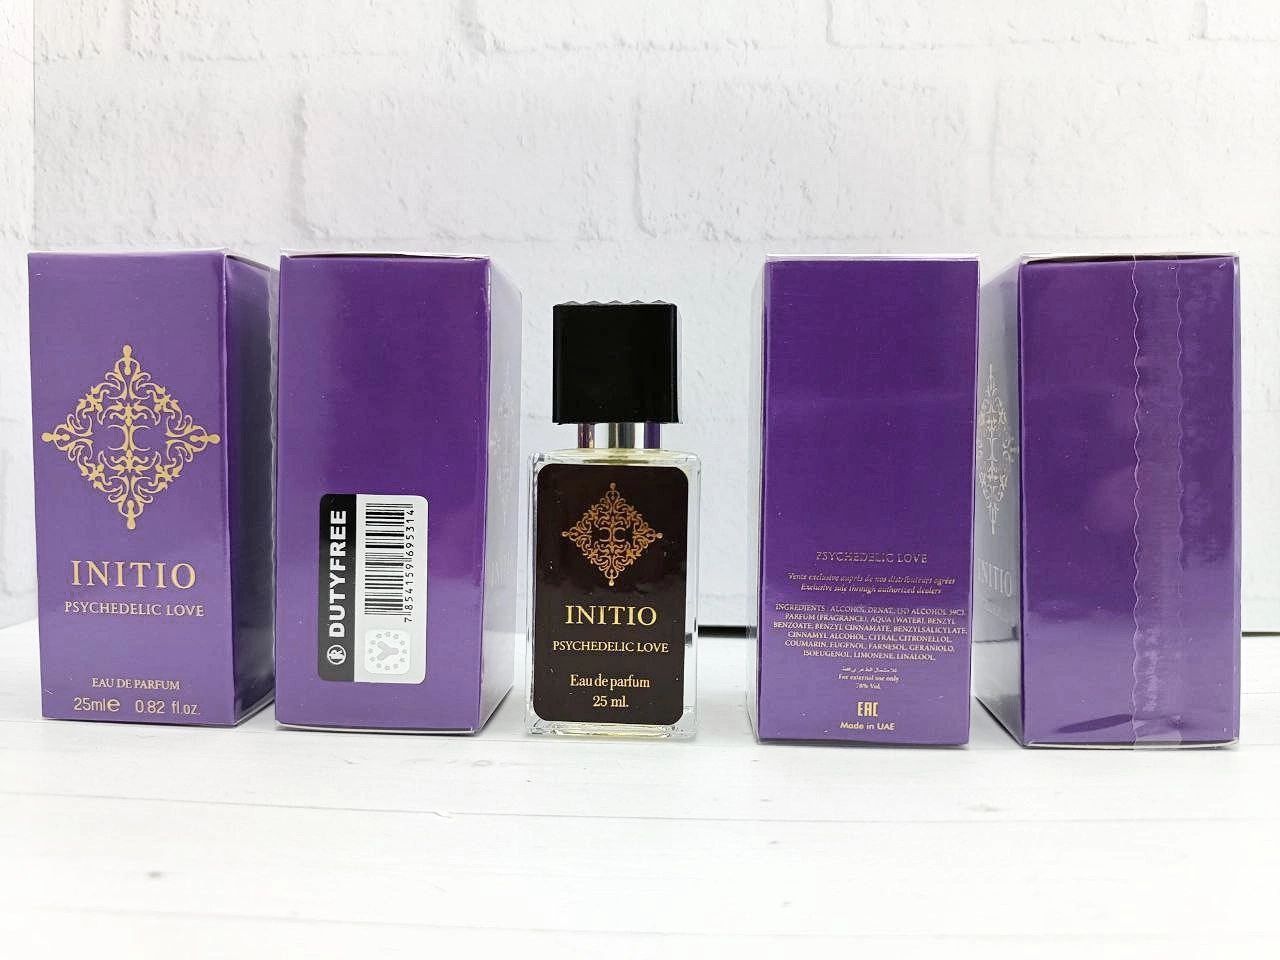 Initio prives psychedelic. Inito Psychedelic Love 25 мл. Психоделик Парфюм. Инитио психоделик. Psychedelic Love Initio Parfums prives.